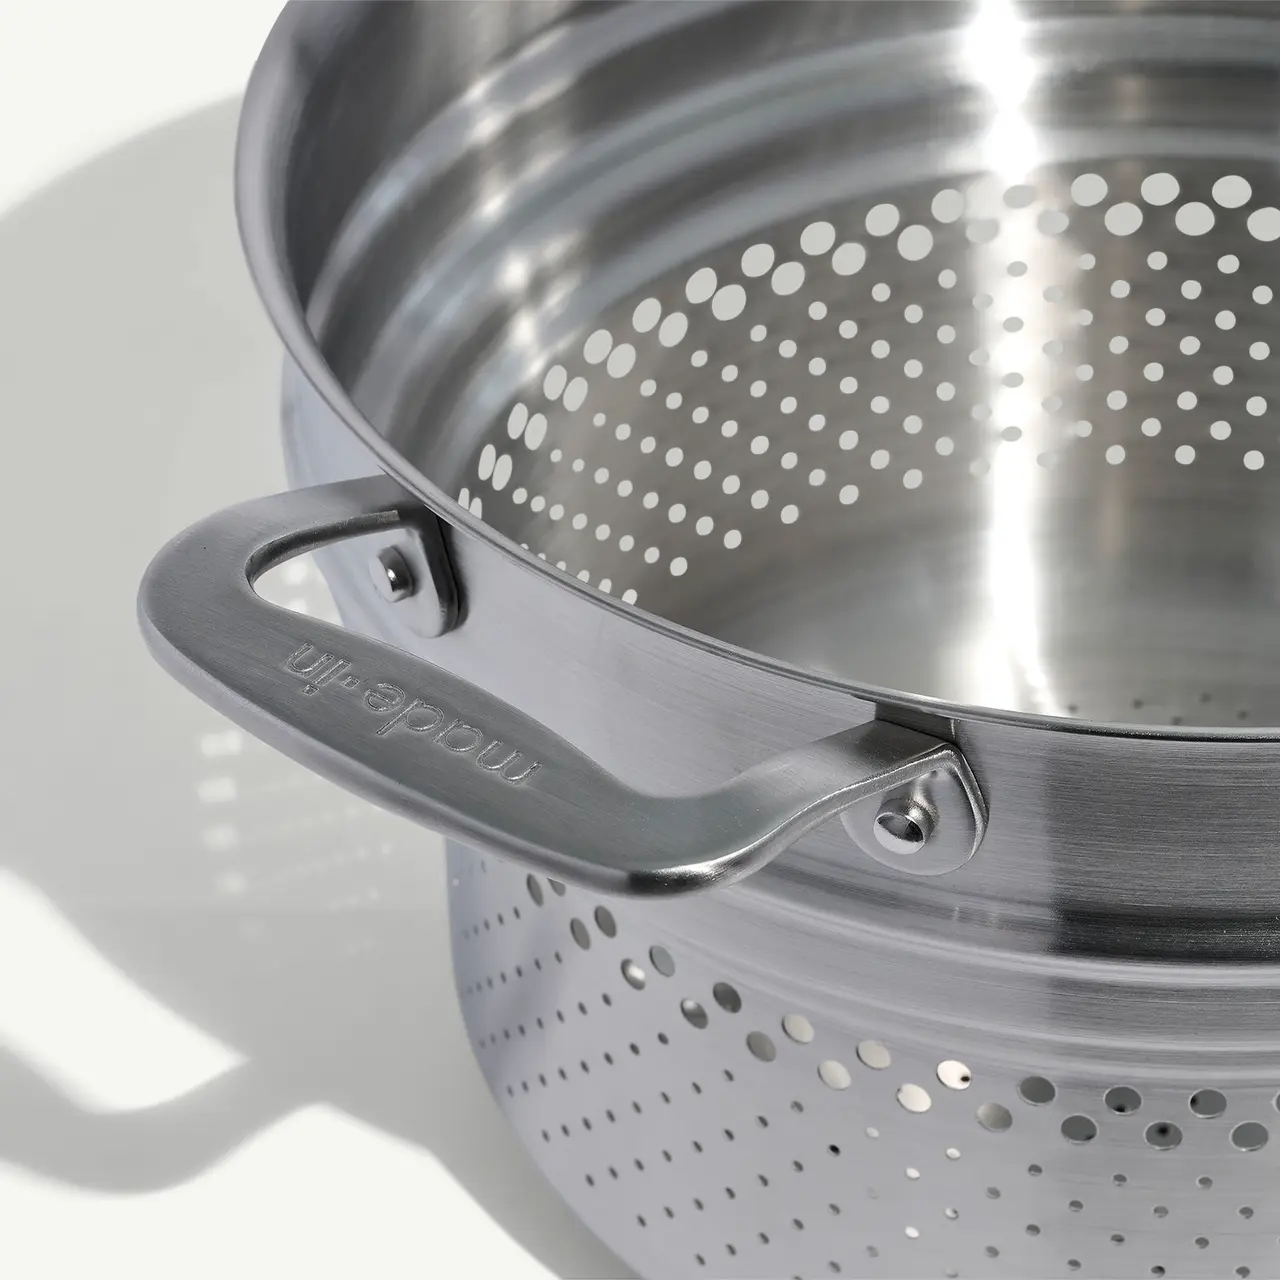 A close-up of a stainless steel colander showing its perforated surface and sturdy handle with a shadow cast on a plain background.